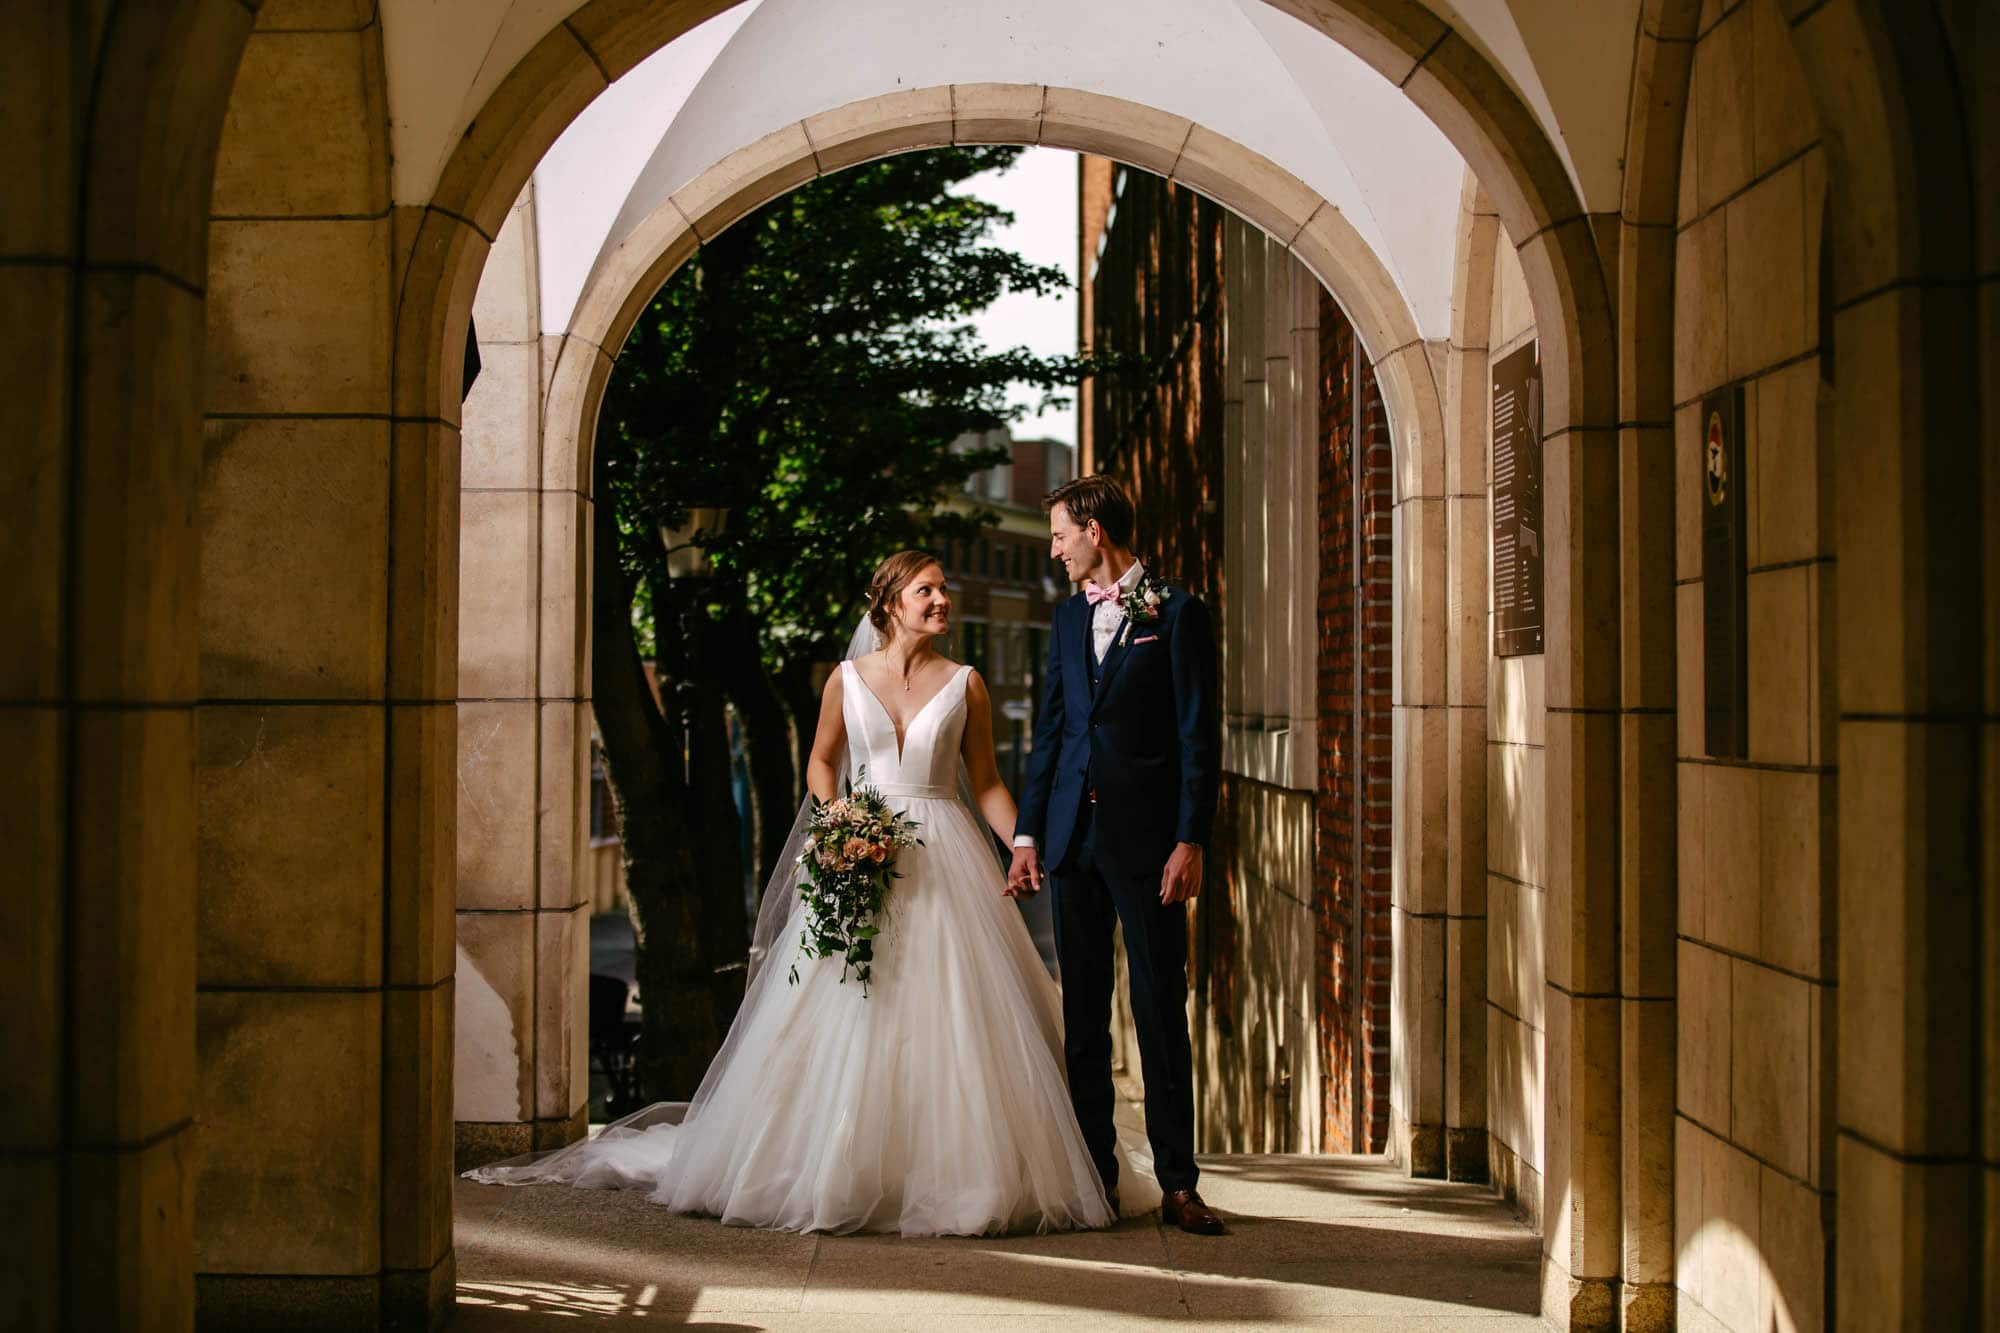 A bride and groom stand in an archway.